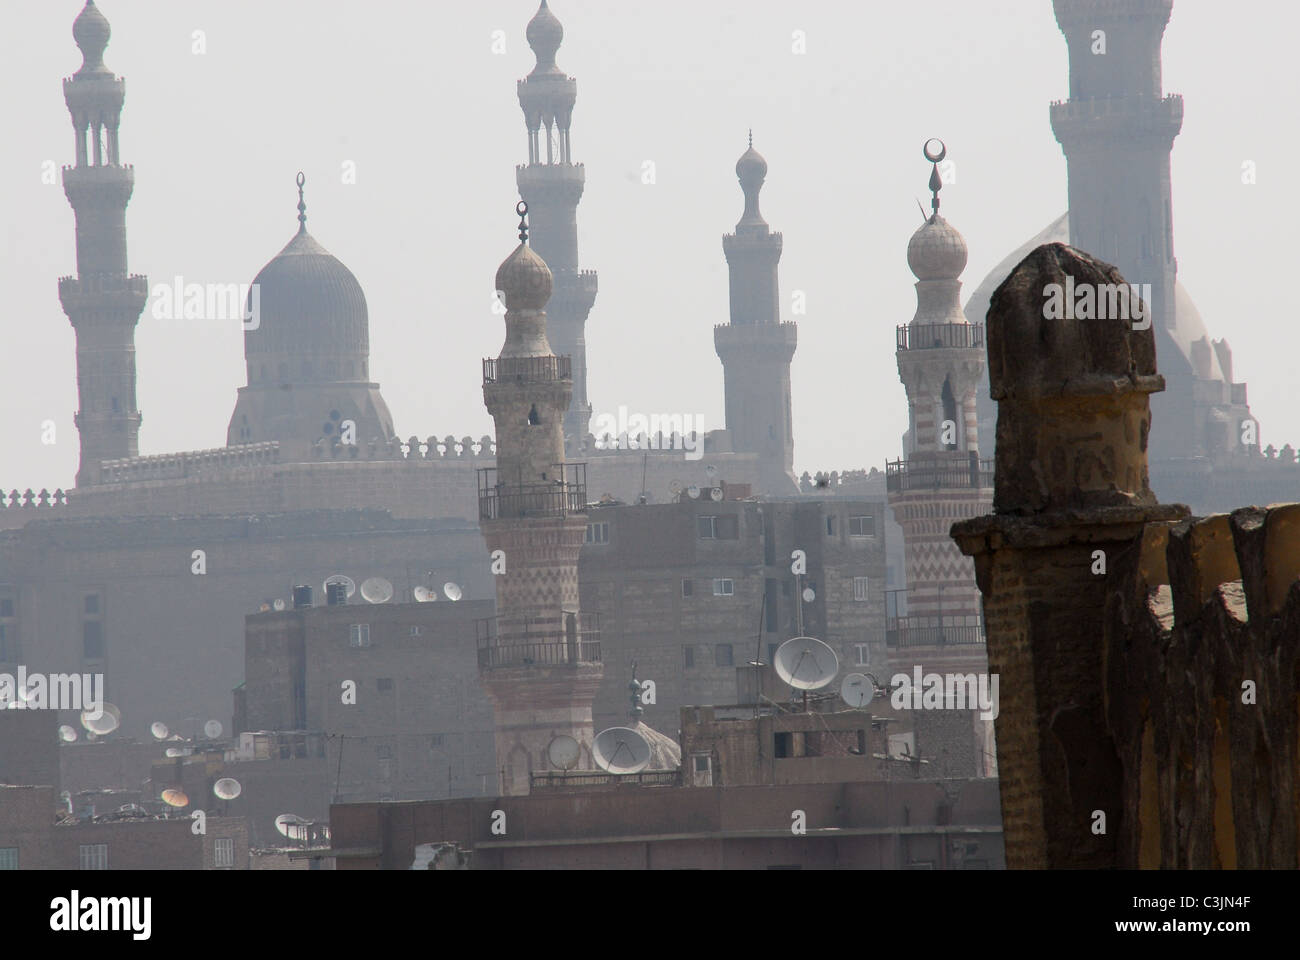 A corner of the Mosque of Ibn Tulun (lower right) with the minarets of Rifa'ai and Sultan Hassan mosques in the background. Stock Photo